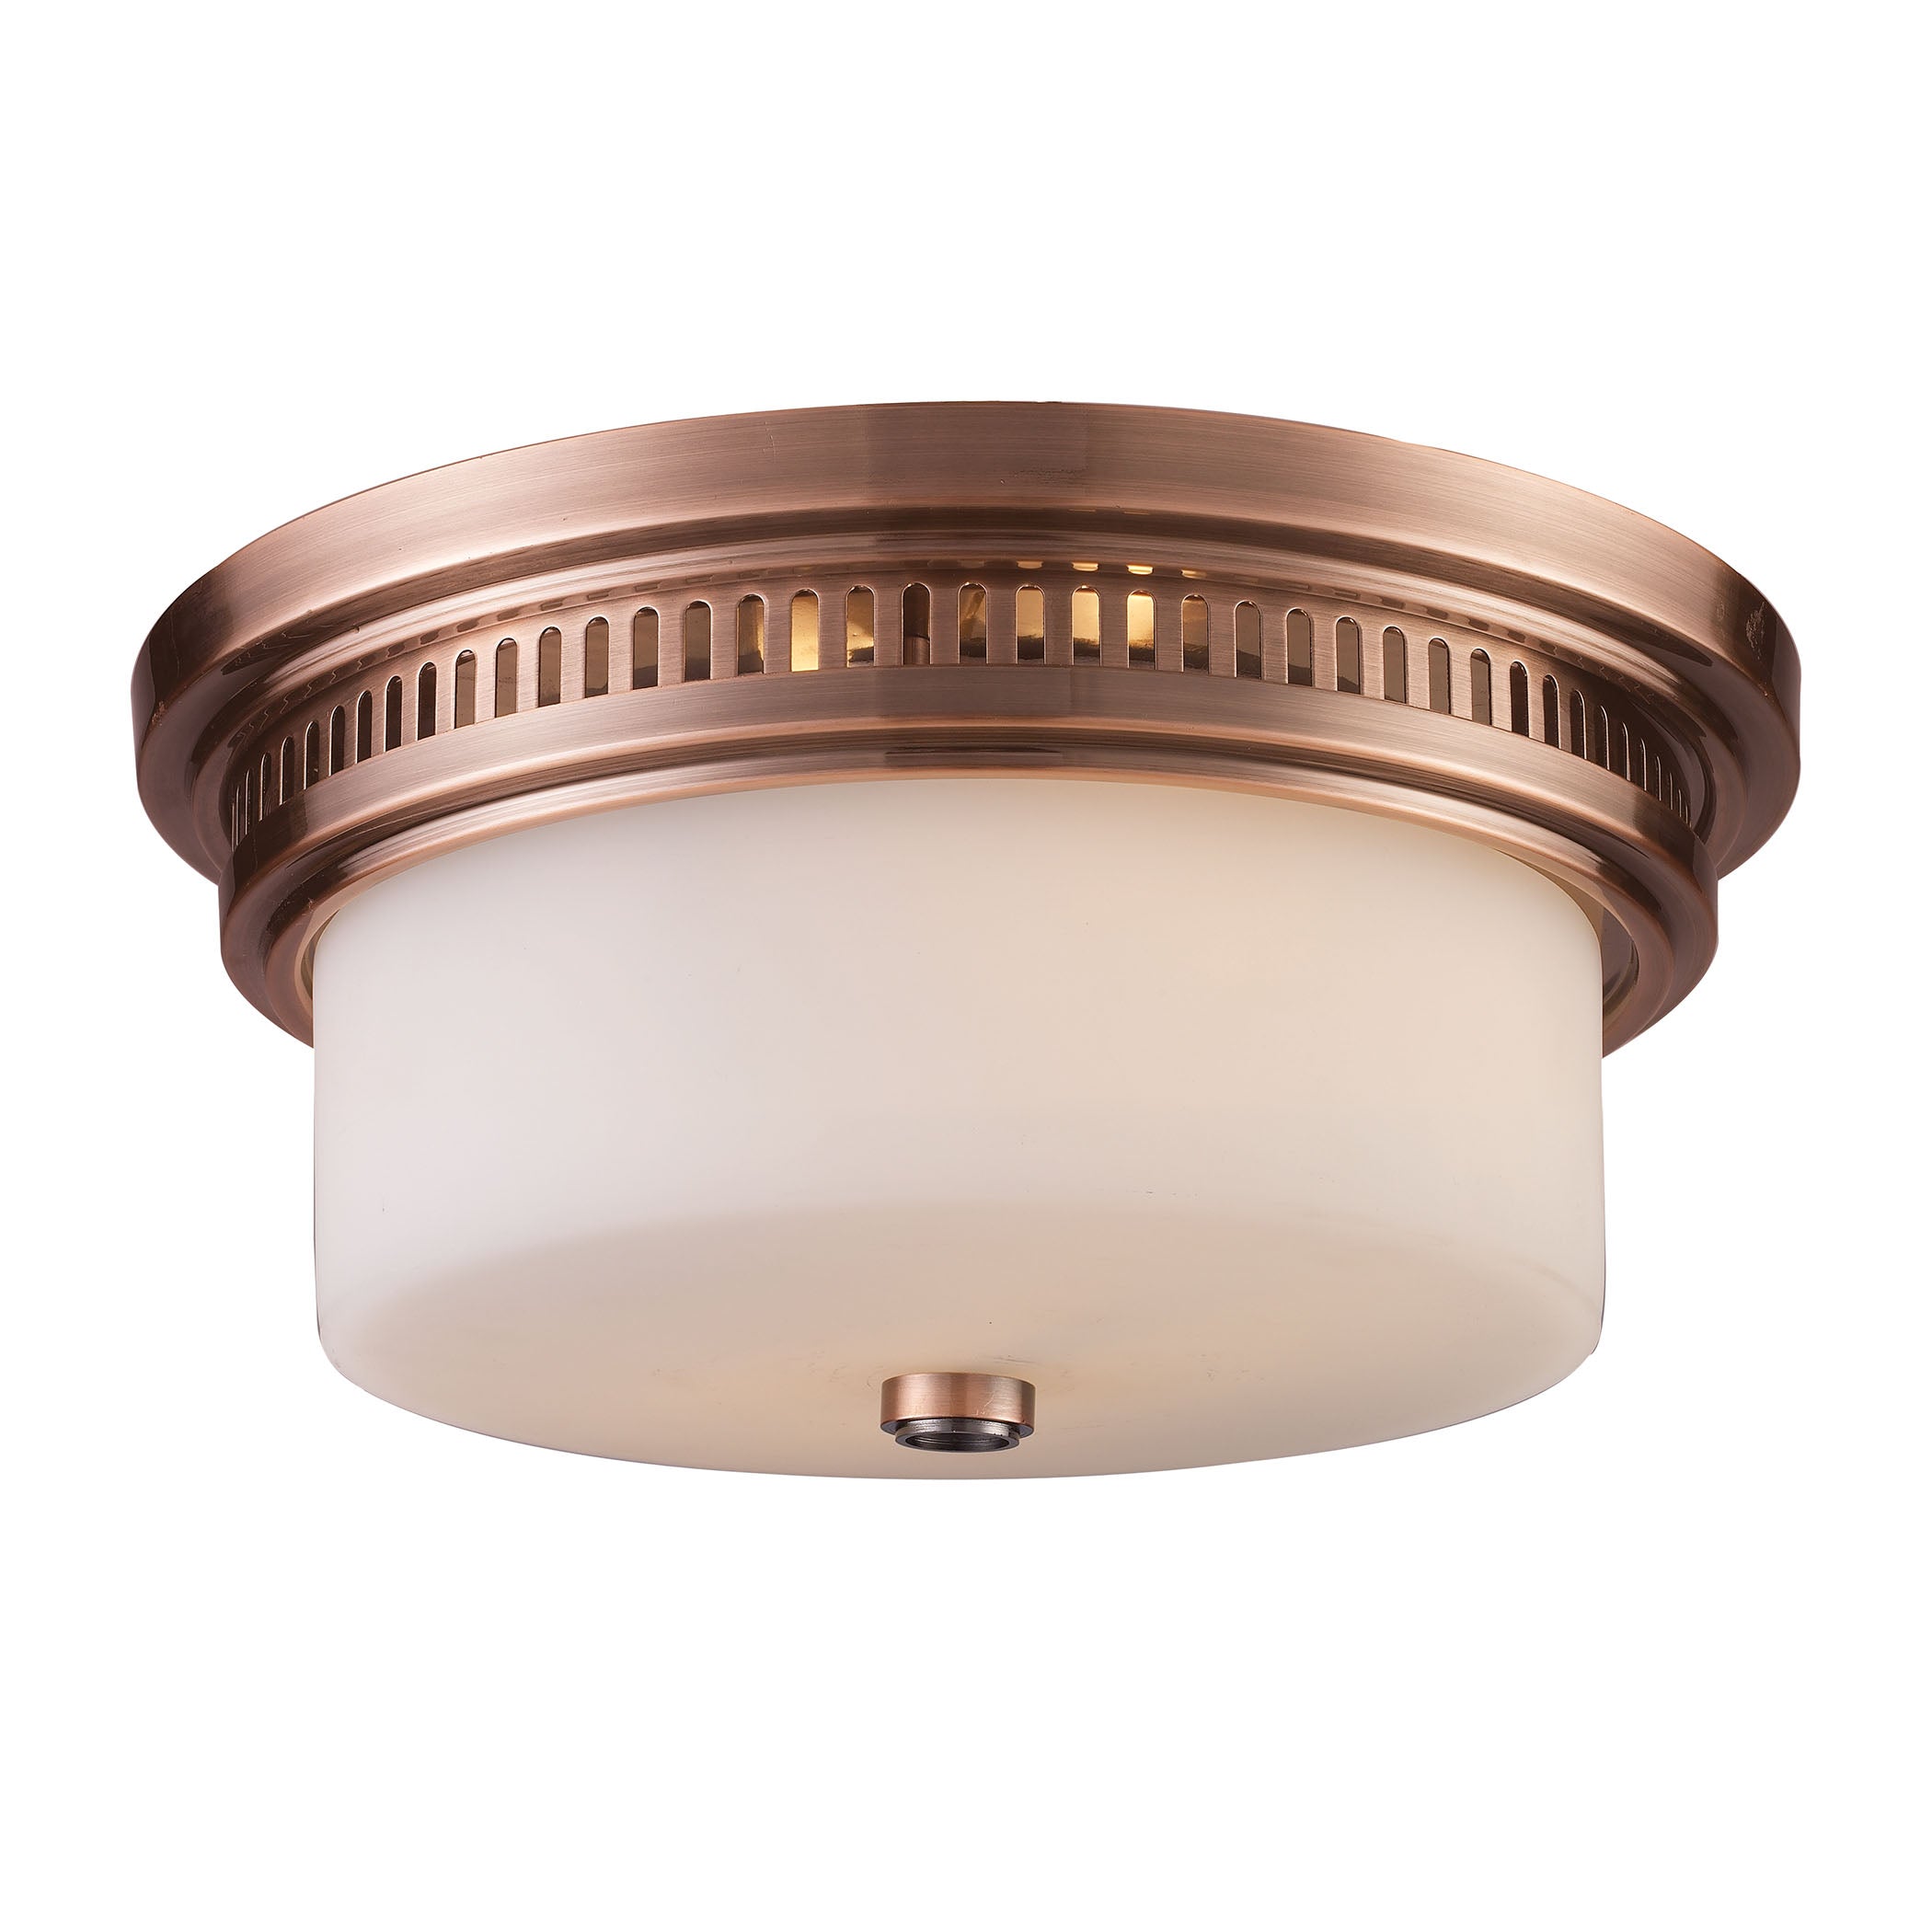 ELK Lighting 66141-2 Chadwick 2-Light Flush Mount in Antique Copper with White Glass